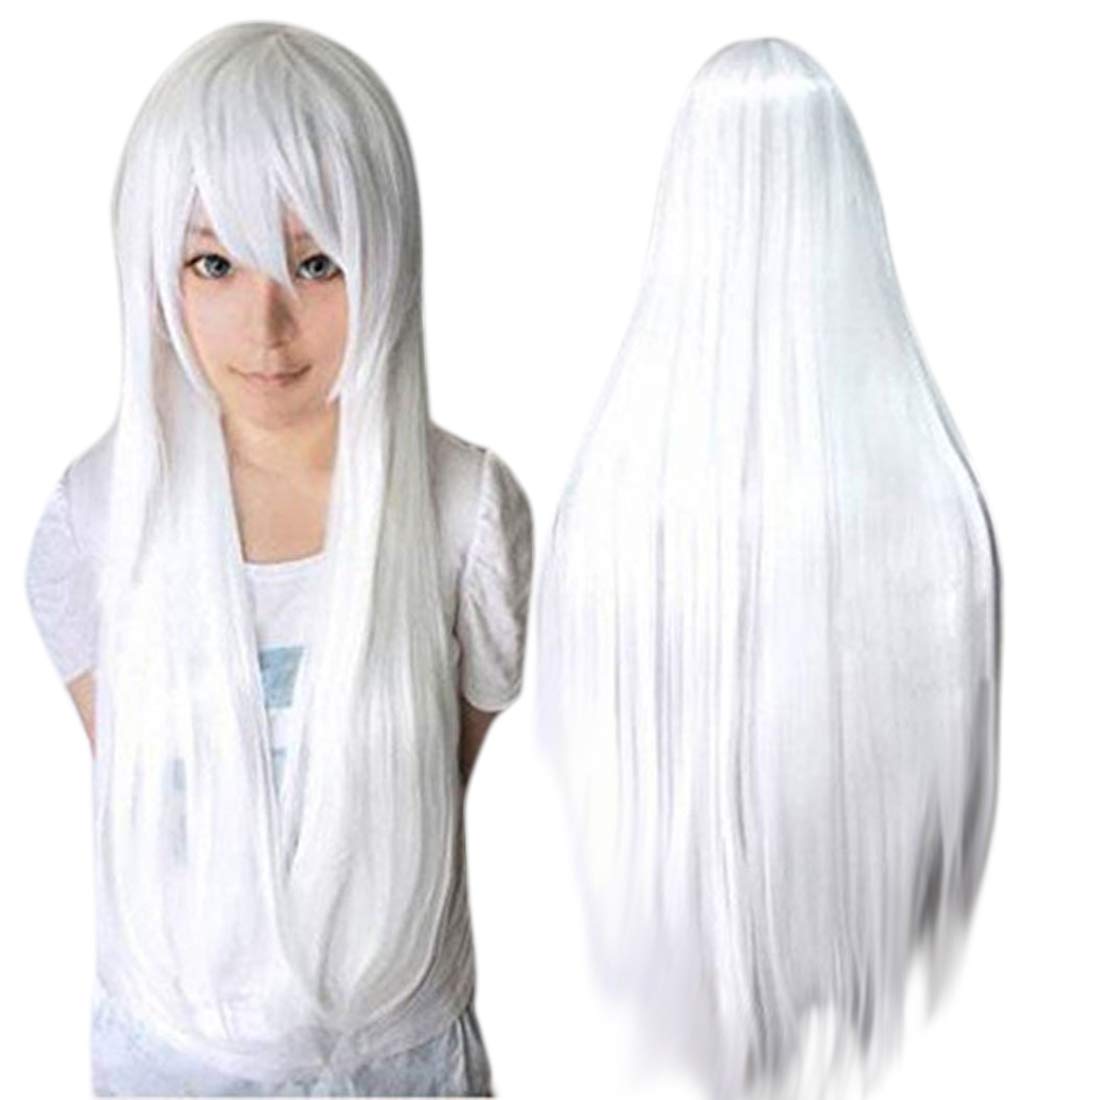 Mua Anogol Hair Cap+32Inch/80Cm Long White Wig Straight Synthetic Wigs  White Cosplay Wig For Halloween Costume, White Wig With Bangs For Anime  Cosplay Wig, Peluca Blanca Long Straight Wig For Halloween Party